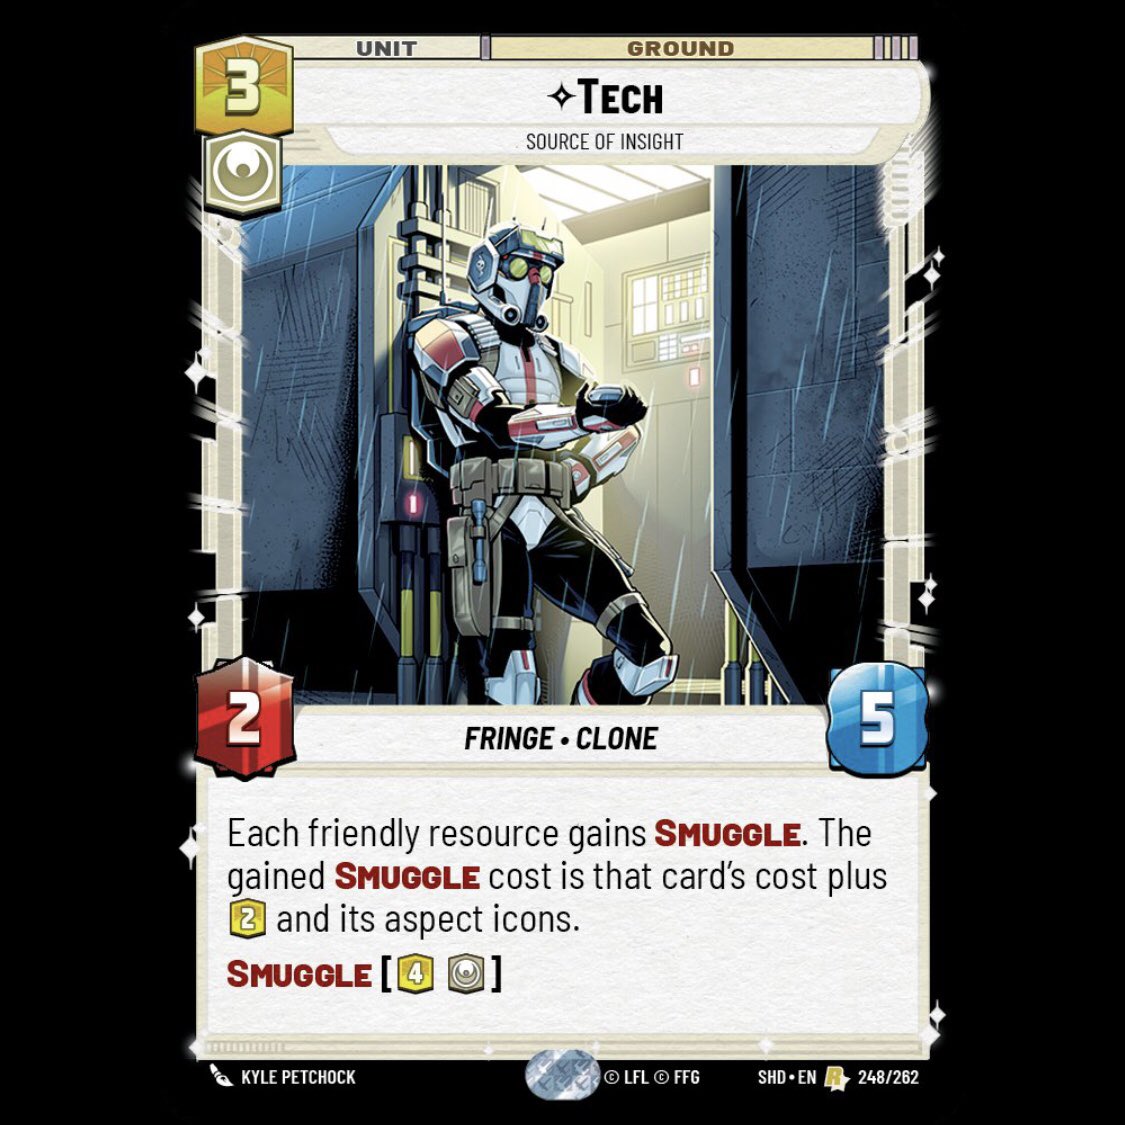 Check it out! I’ve been seeing this card make it’s rounds online, and I’m excited to finally be able to share another card piece I got to draw for the second set of @UnlimitedFFG Shadows of the Galaxy!Set 2 releases worldwide this July! #starwars #starwarsunlimited #thebadbatch